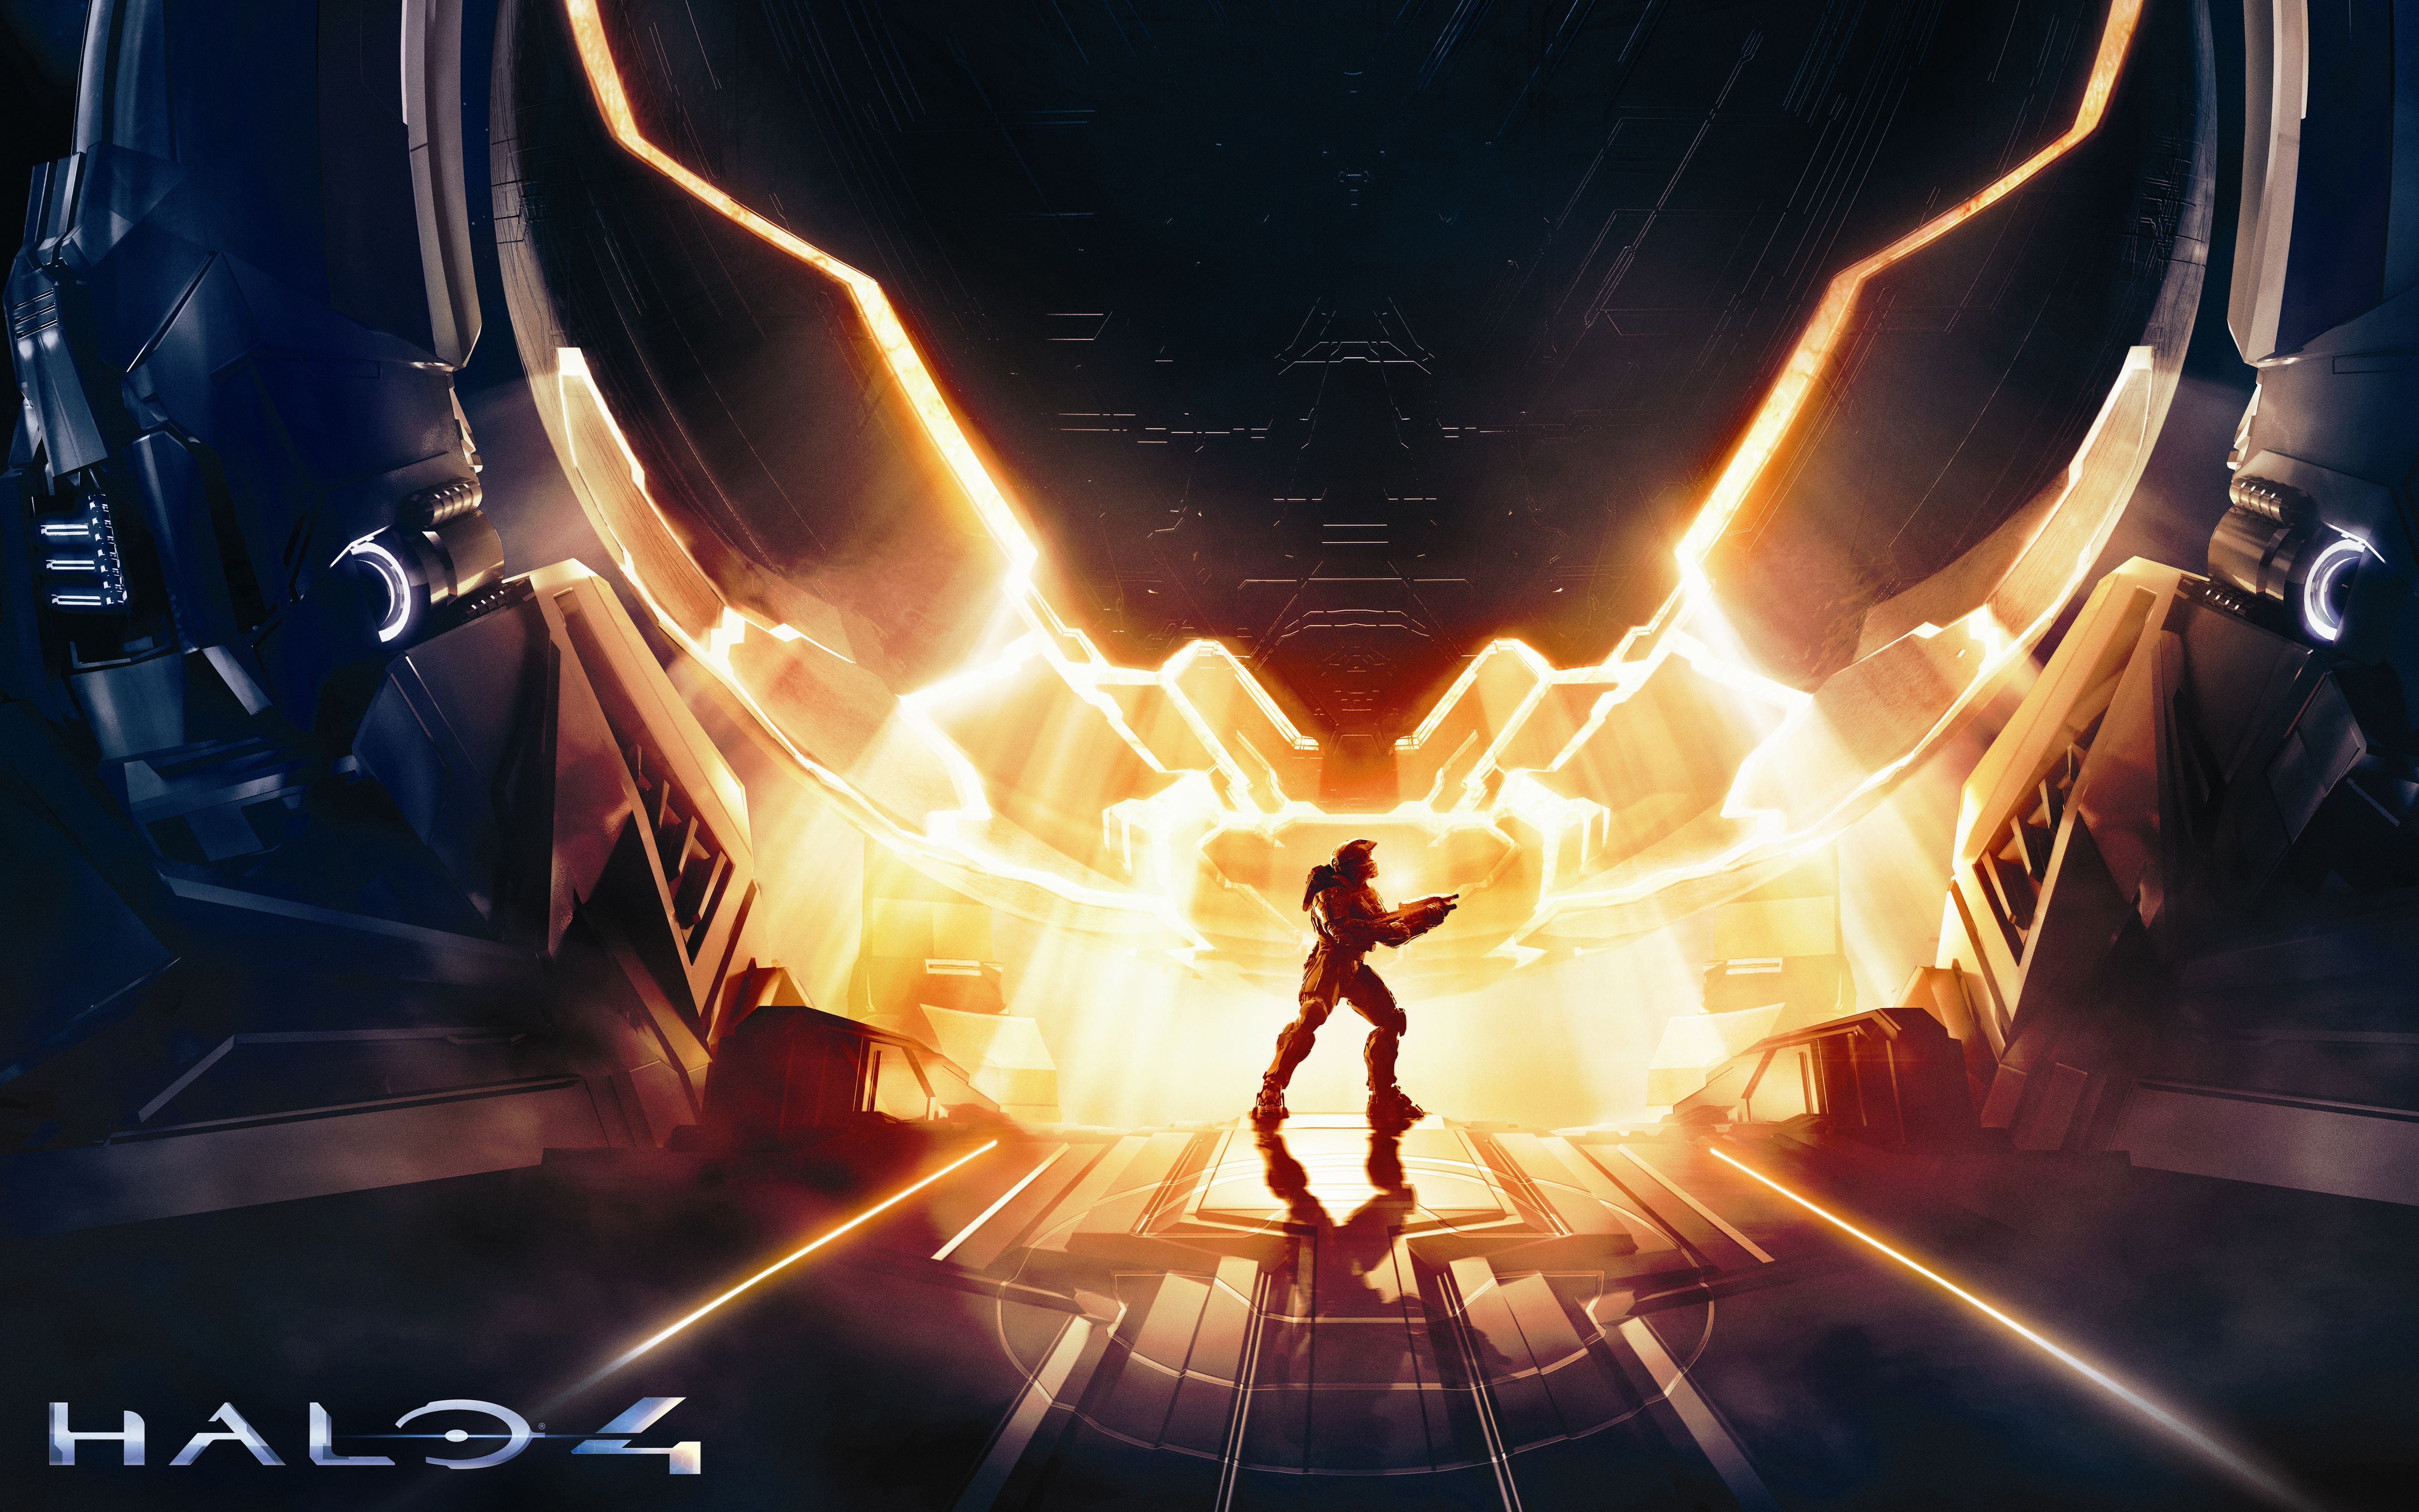 Halo 4 Xbox 360 Game Wallpapers